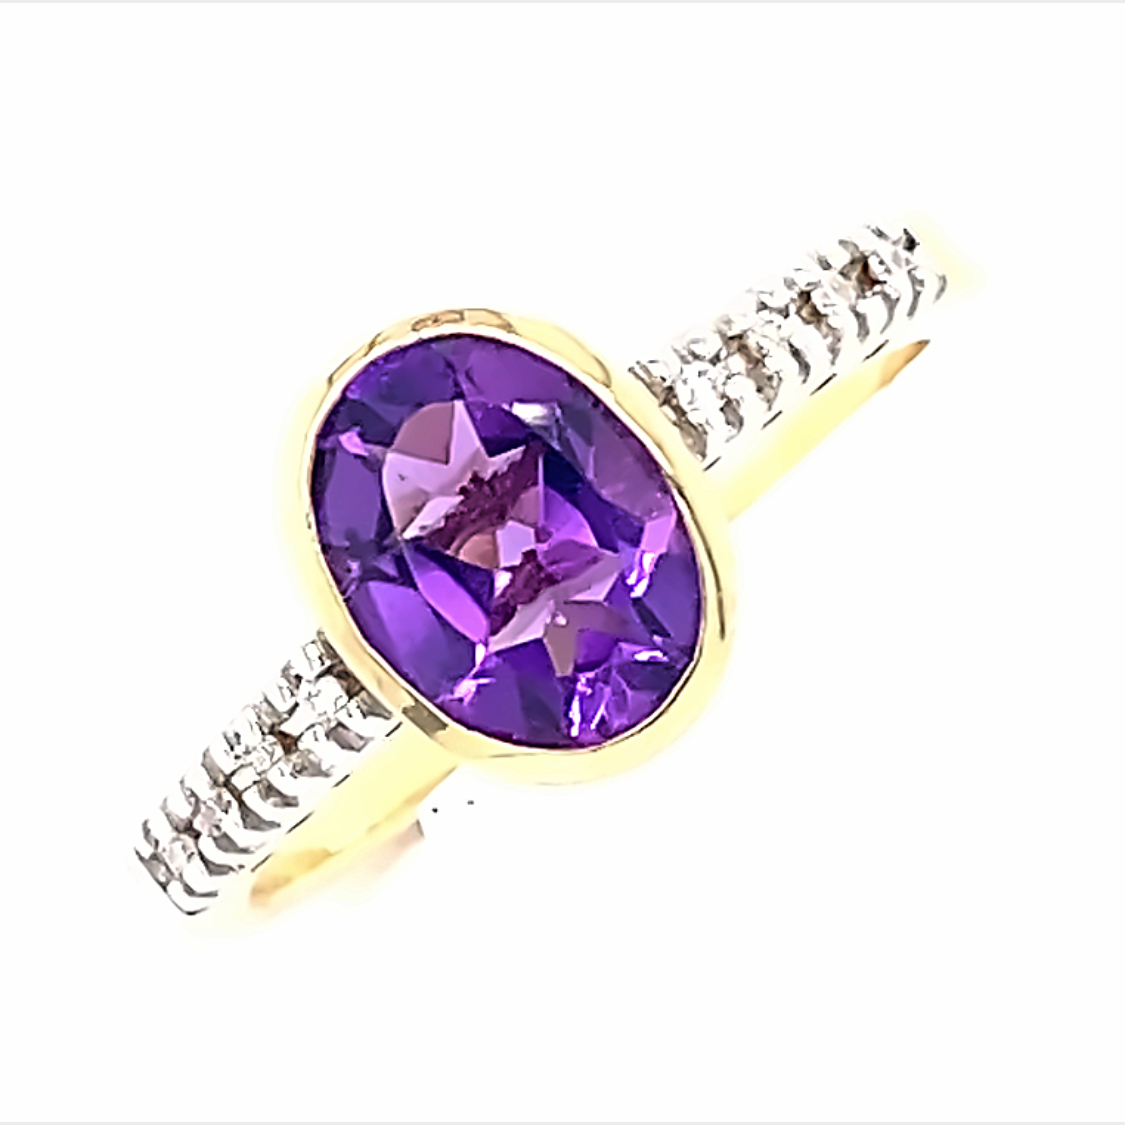 9 Carat Yellow and White Gold Amethyst and Diamond Ring